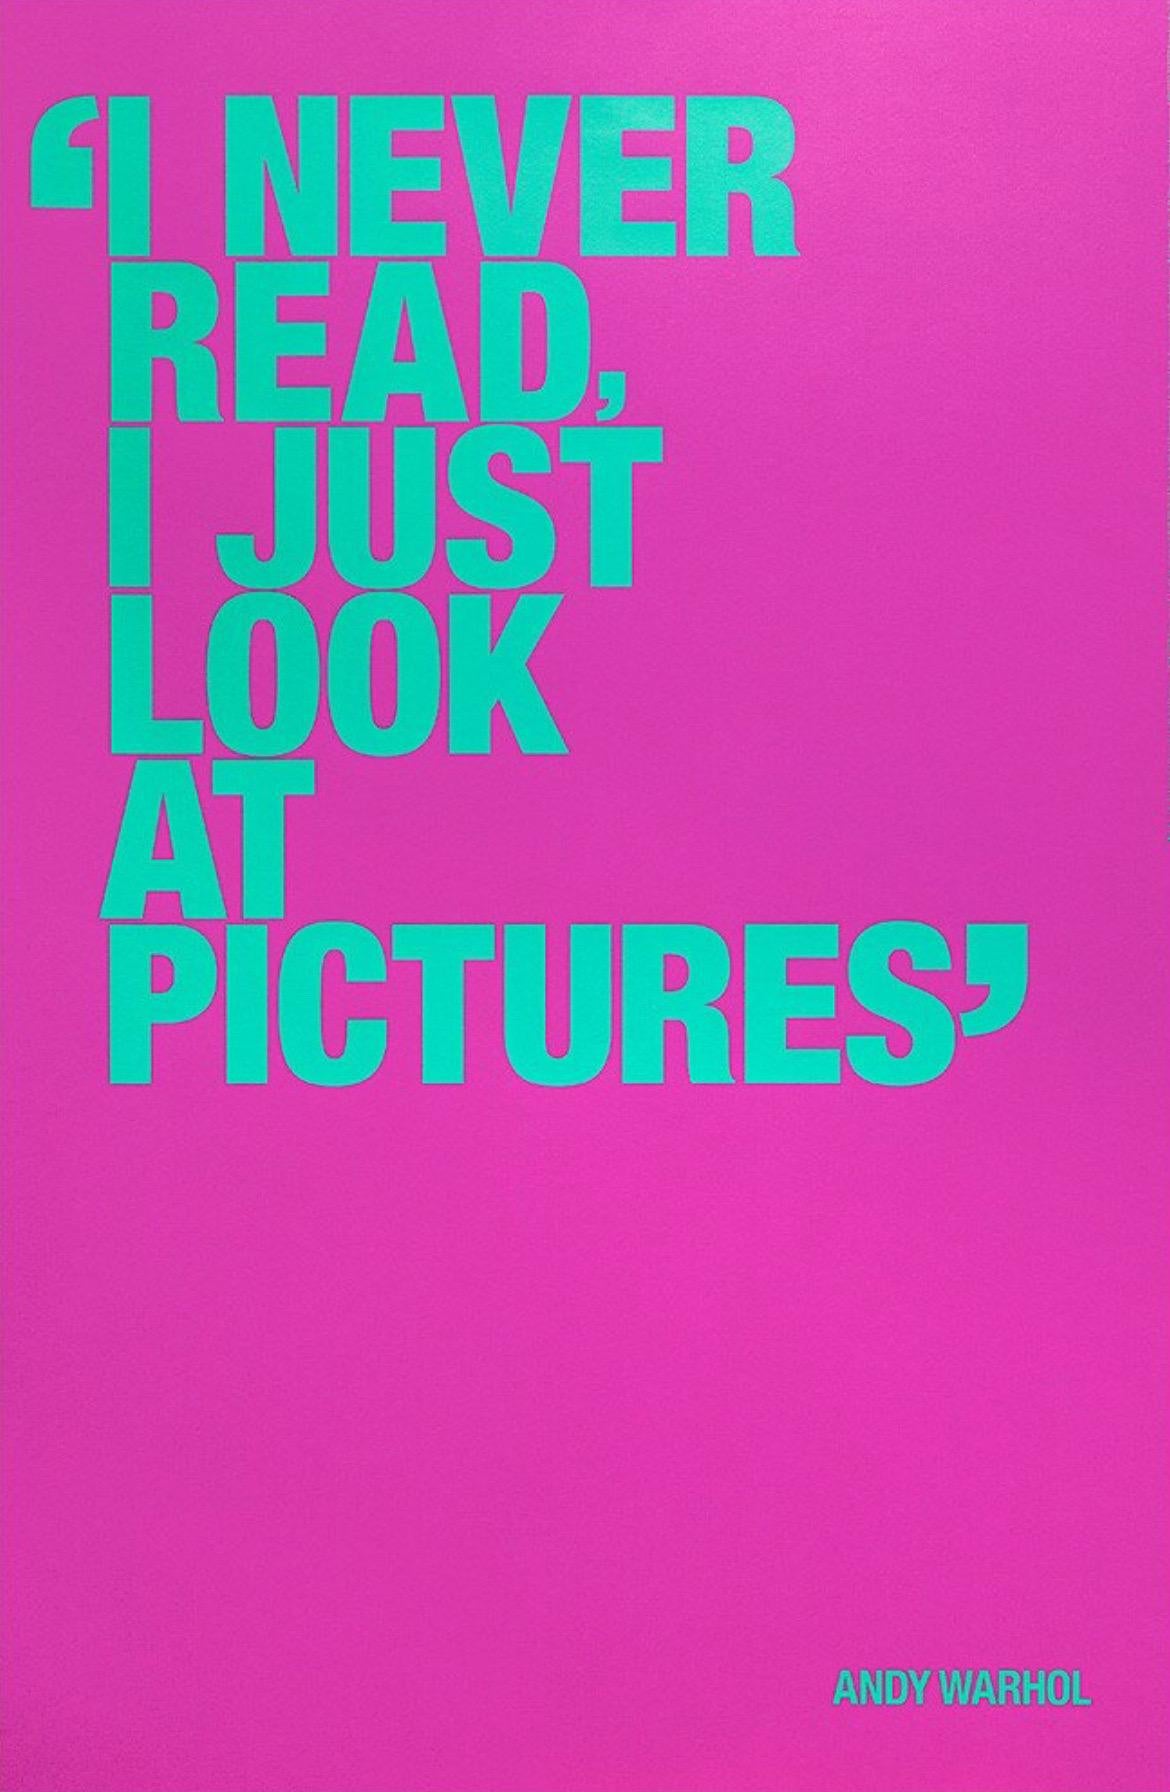 Andy Warhol, I Never Read (Special Edition)

Silkscreen Print on colourplan 270gsm paper, a premium uncoated coloured paper made in the UK

64 x 97 cm ( 25.19 x 38.18 in) 

Andy Warhol could identify an idea or an image and strip it down to a simple